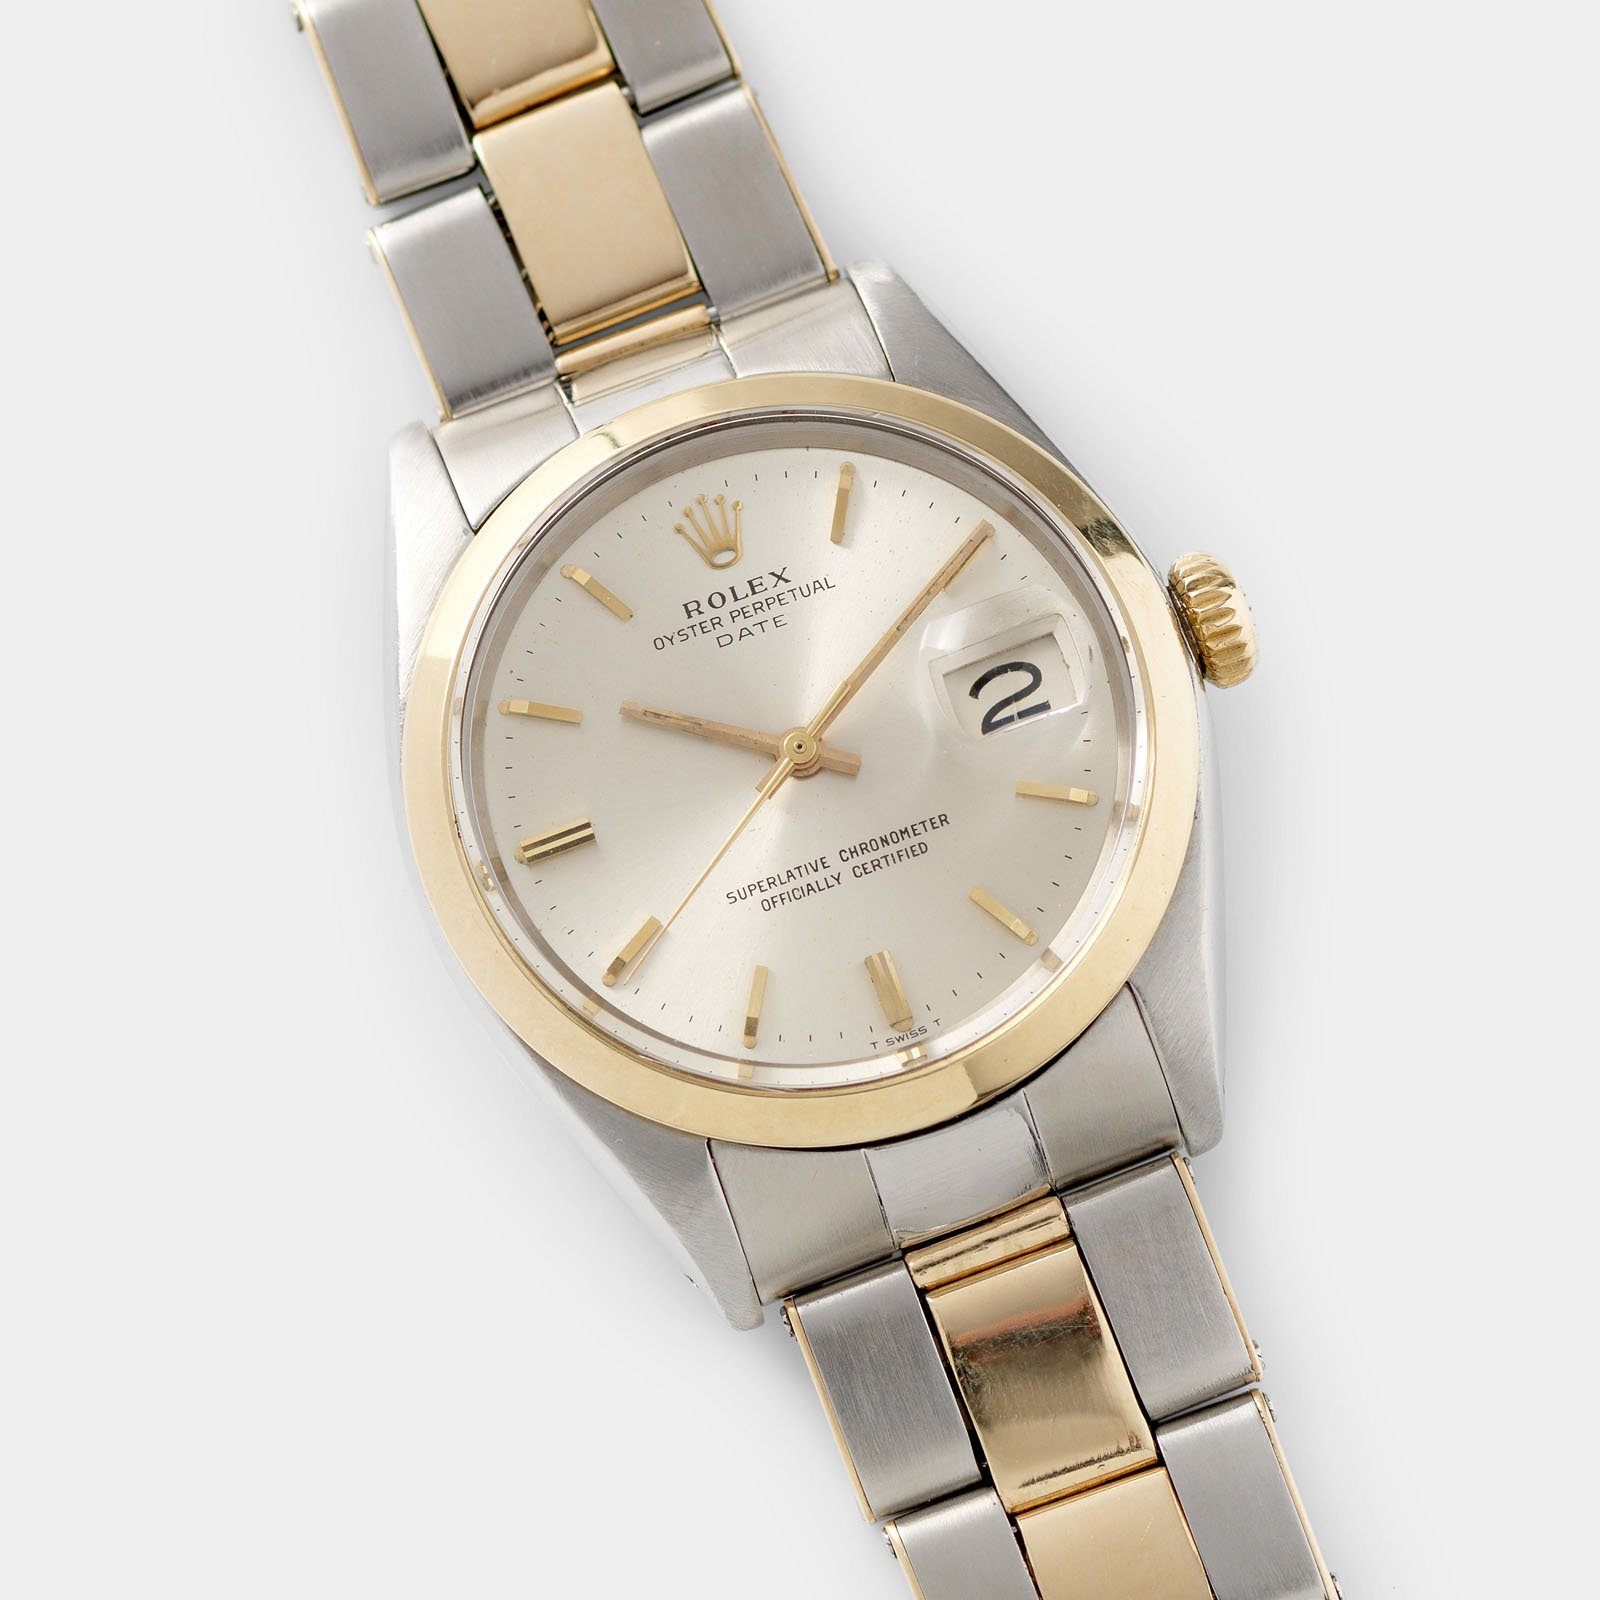 rolex oyster perpetual date 1500 review